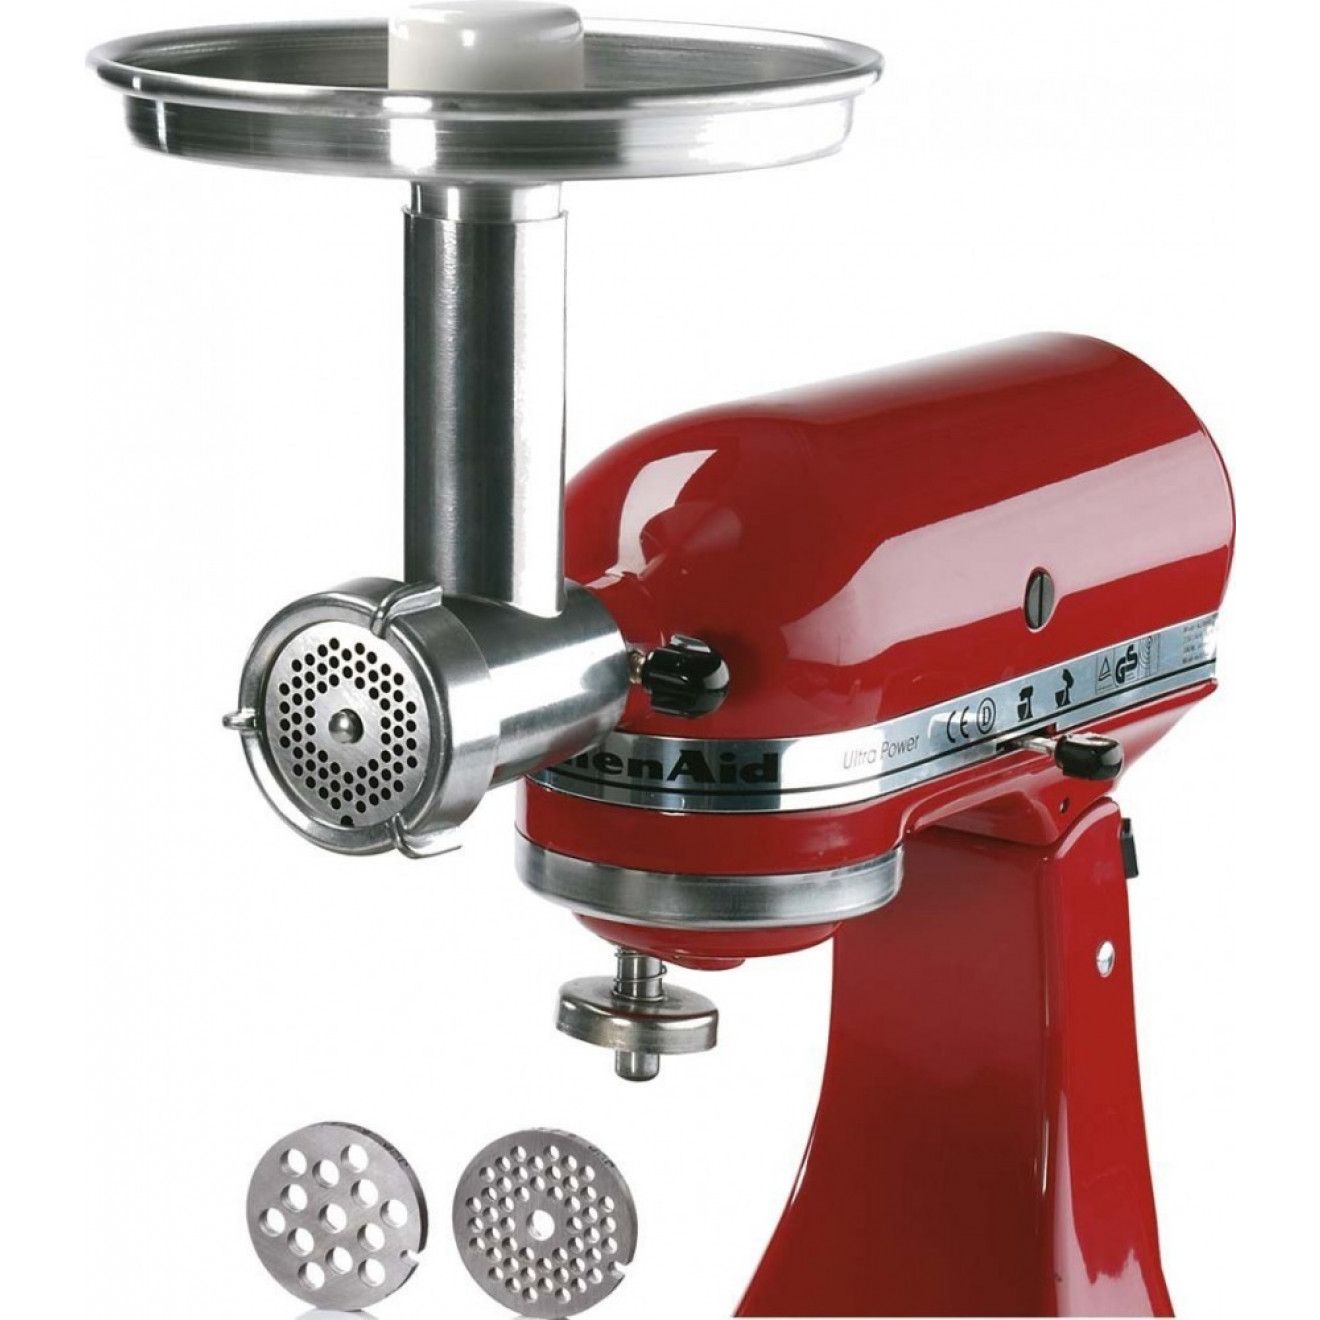 KitchenAid Stand Mixer Stainless Steel Food Grinder Attachment at